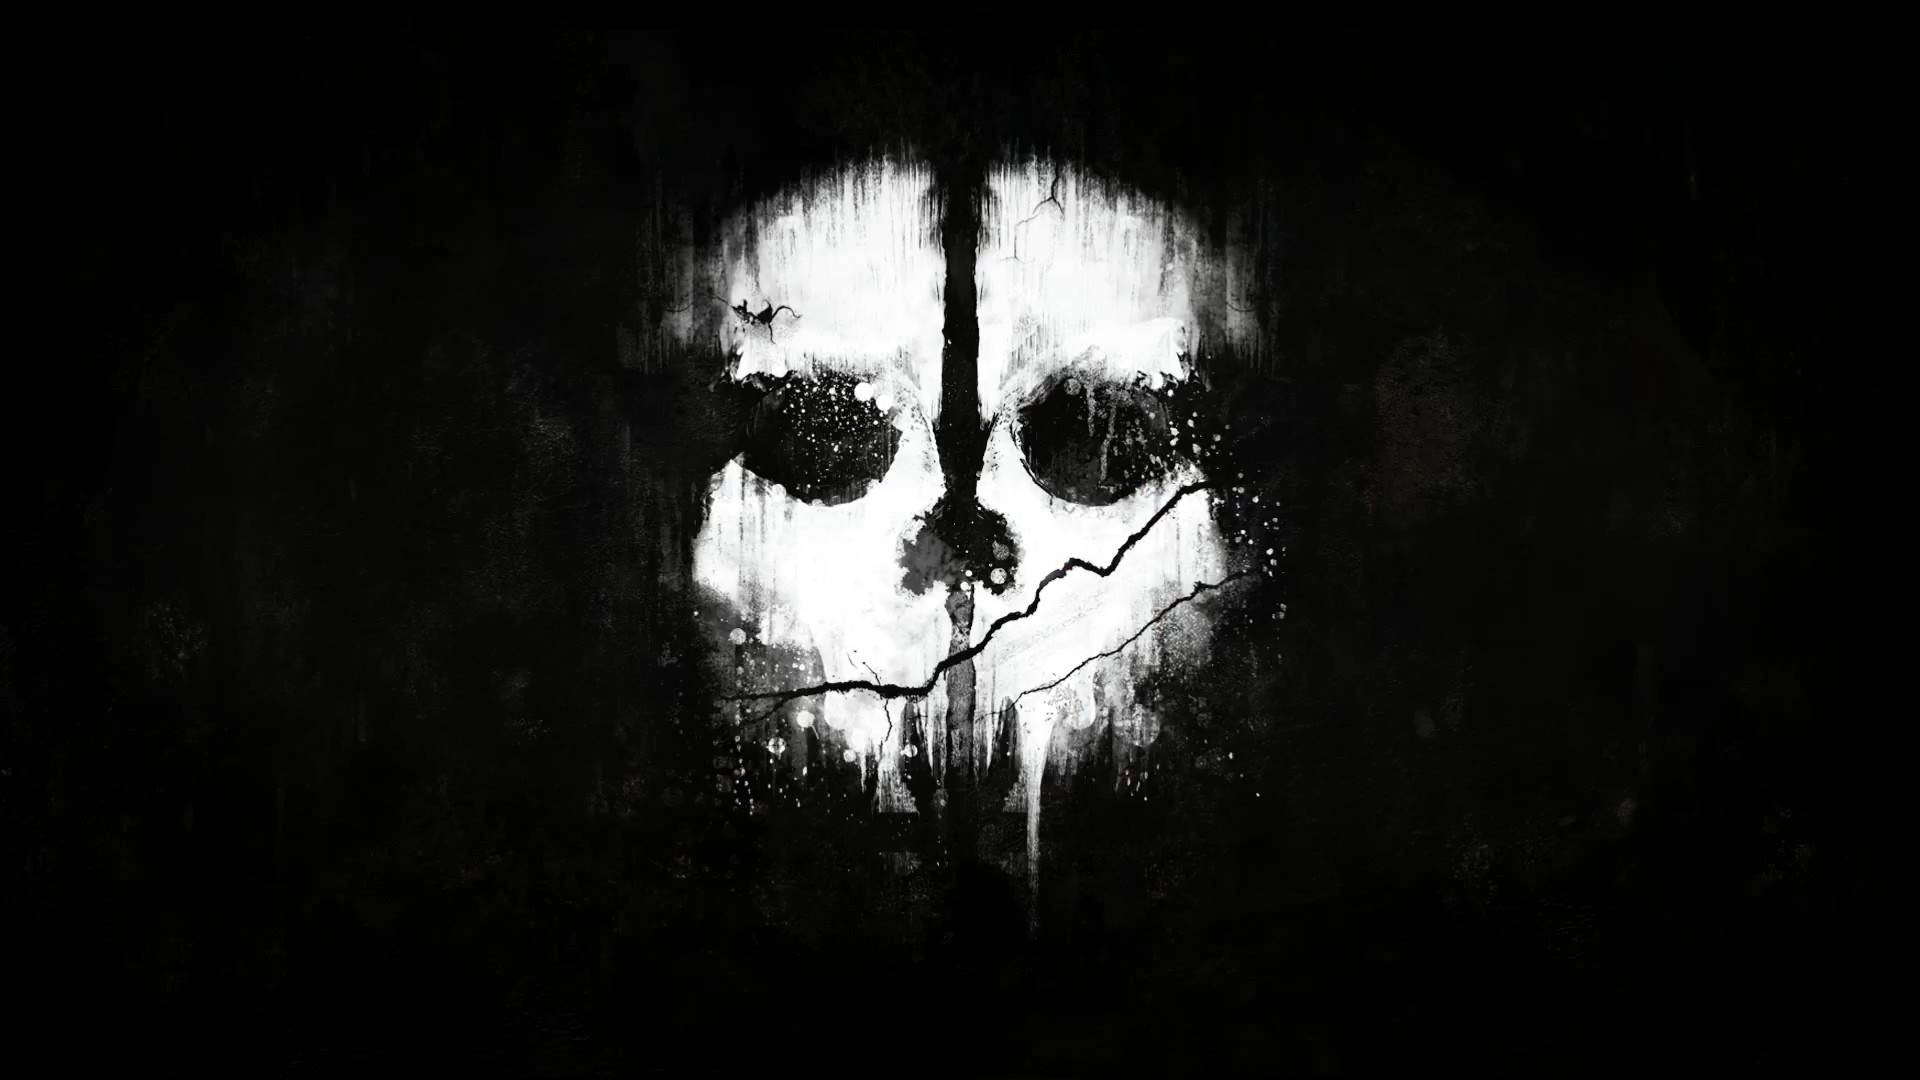 call of duty ghosts wallpaper in hd 171 GamingBoltcom 1920x1080